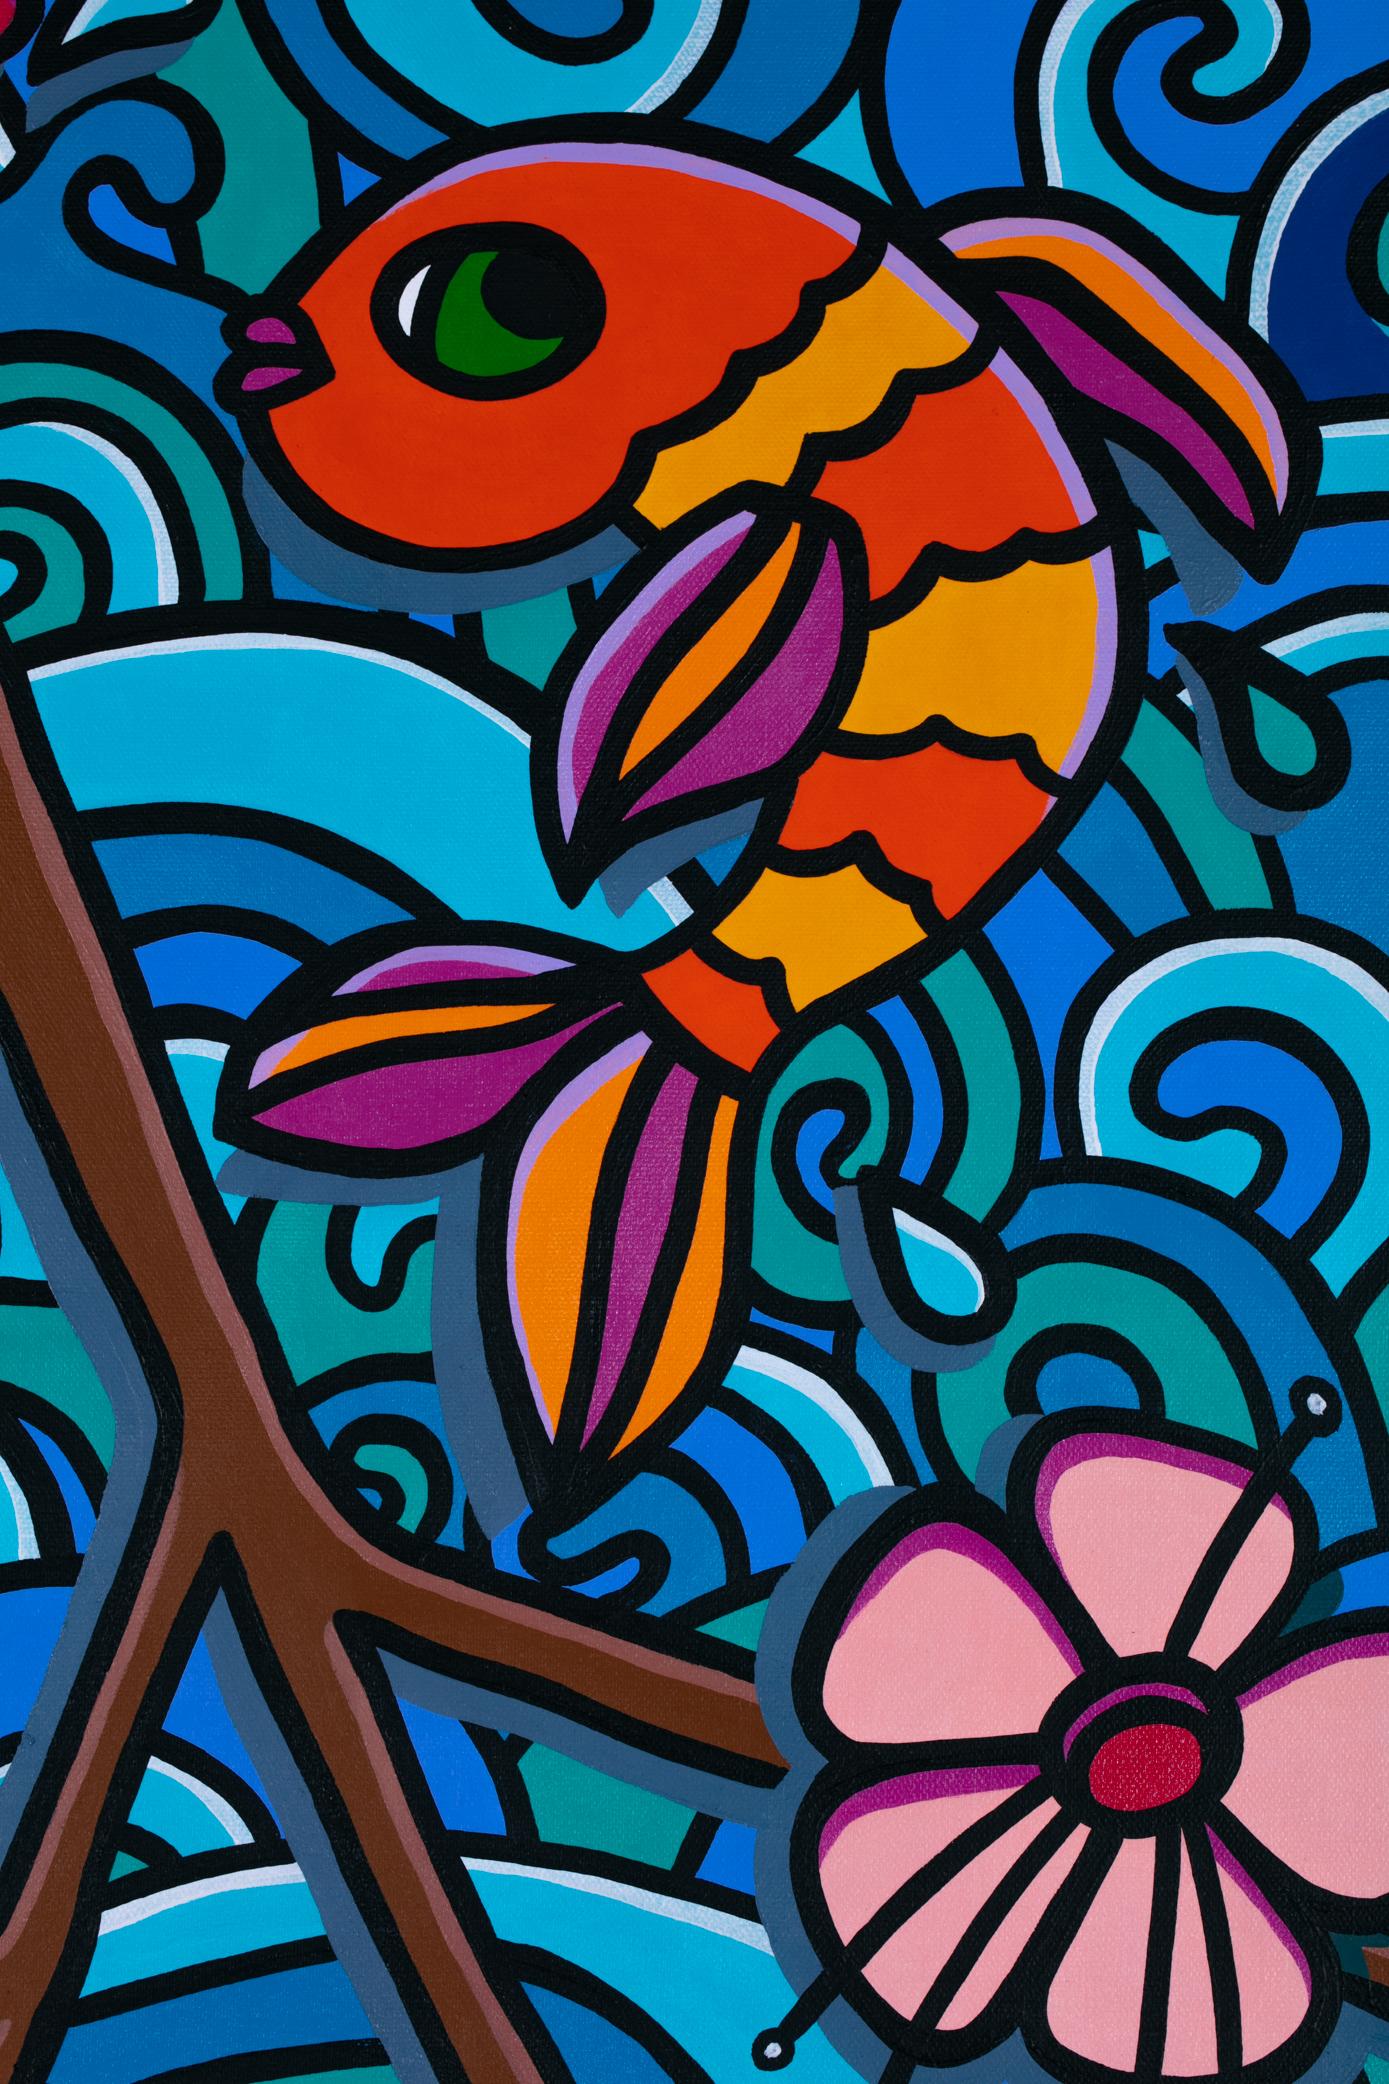 Known for his Pop Art style, here Houska applies an Ombre technique of blue shades to create a unique and festive scene of iconic Koi frolicking in water. His works are happy, joyous and meant to uplift the observer.